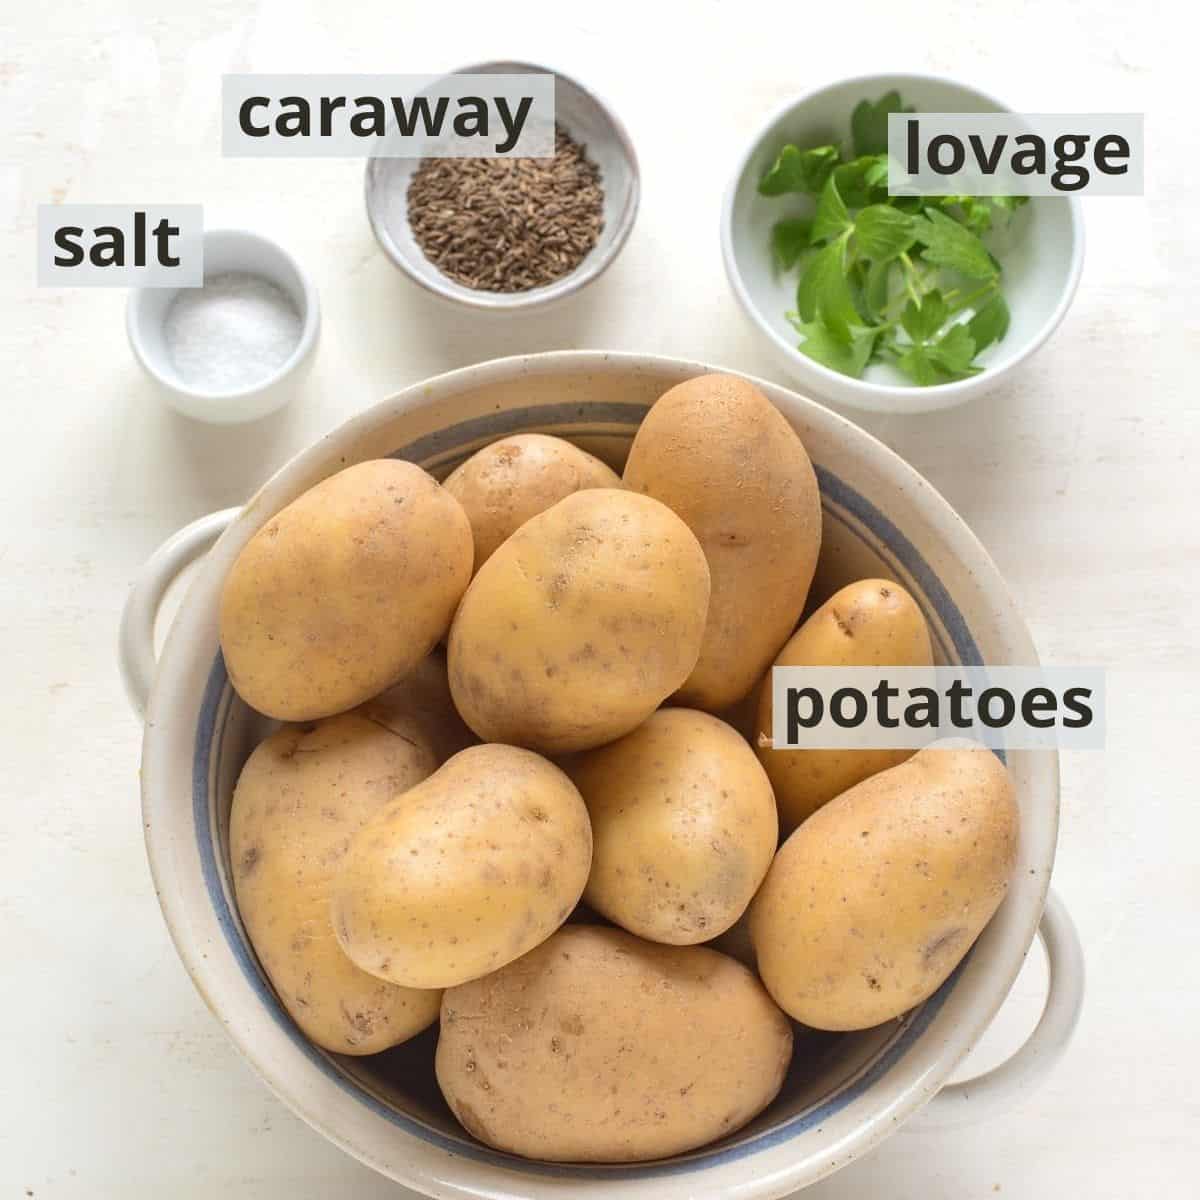 Ingredients for boiled potatoes seasoned with salt, caraway and lovage, with captions.